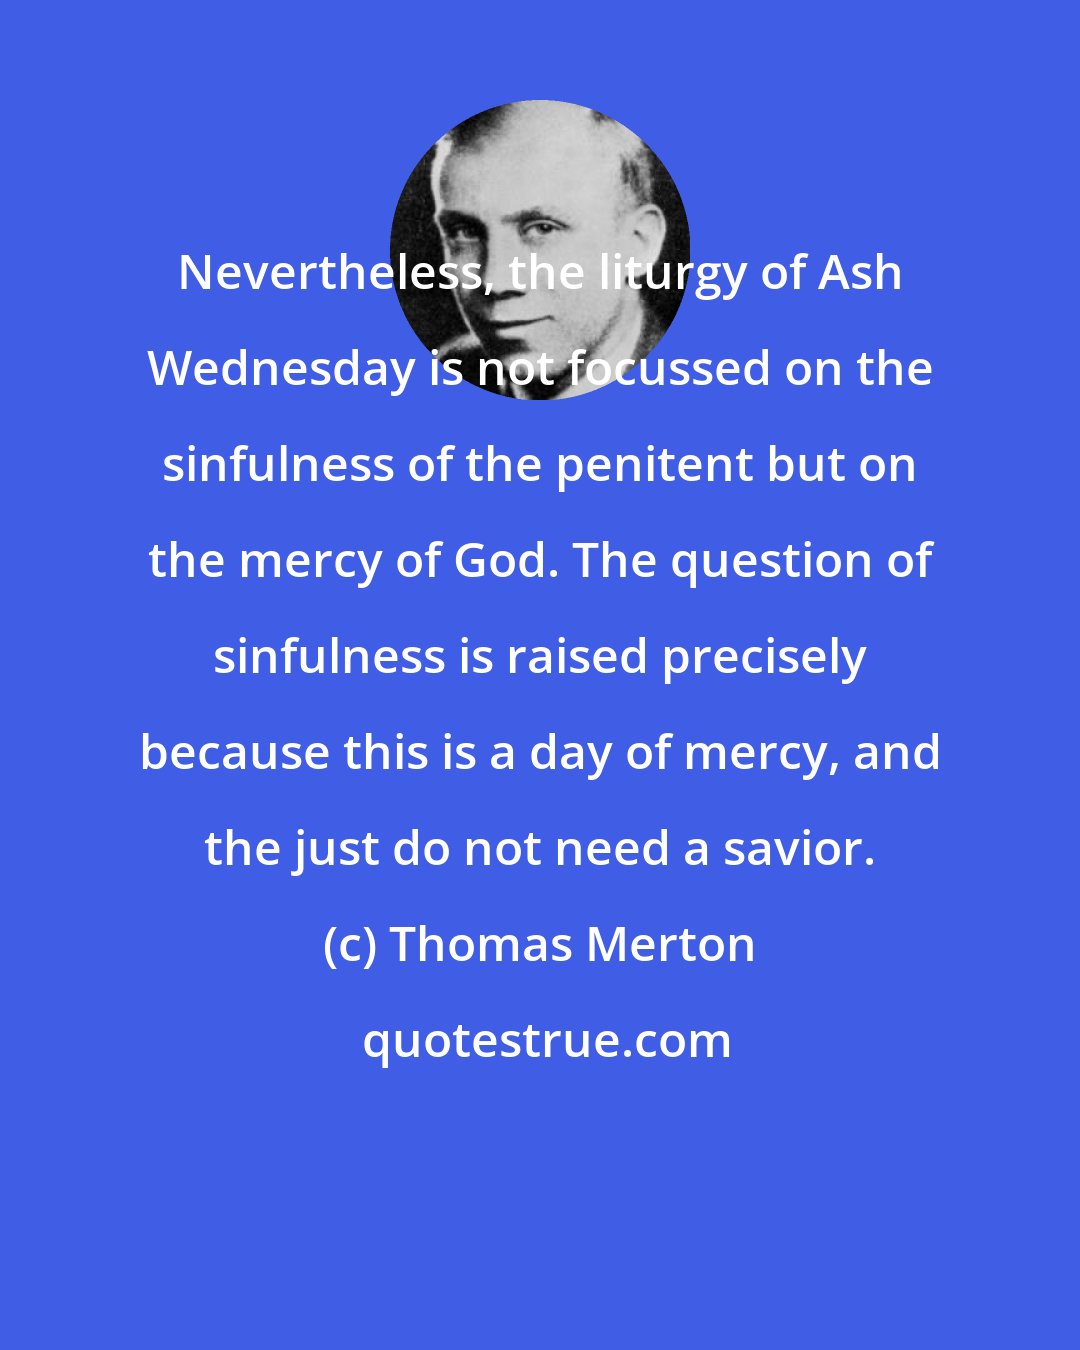 Thomas Merton: Nevertheless, the liturgy of Ash Wednesday is not focussed on the sinfulness of the penitent but on the mercy of God. The question of sinfulness is raised precisely because this is a day of mercy, and the just do not need a savior.